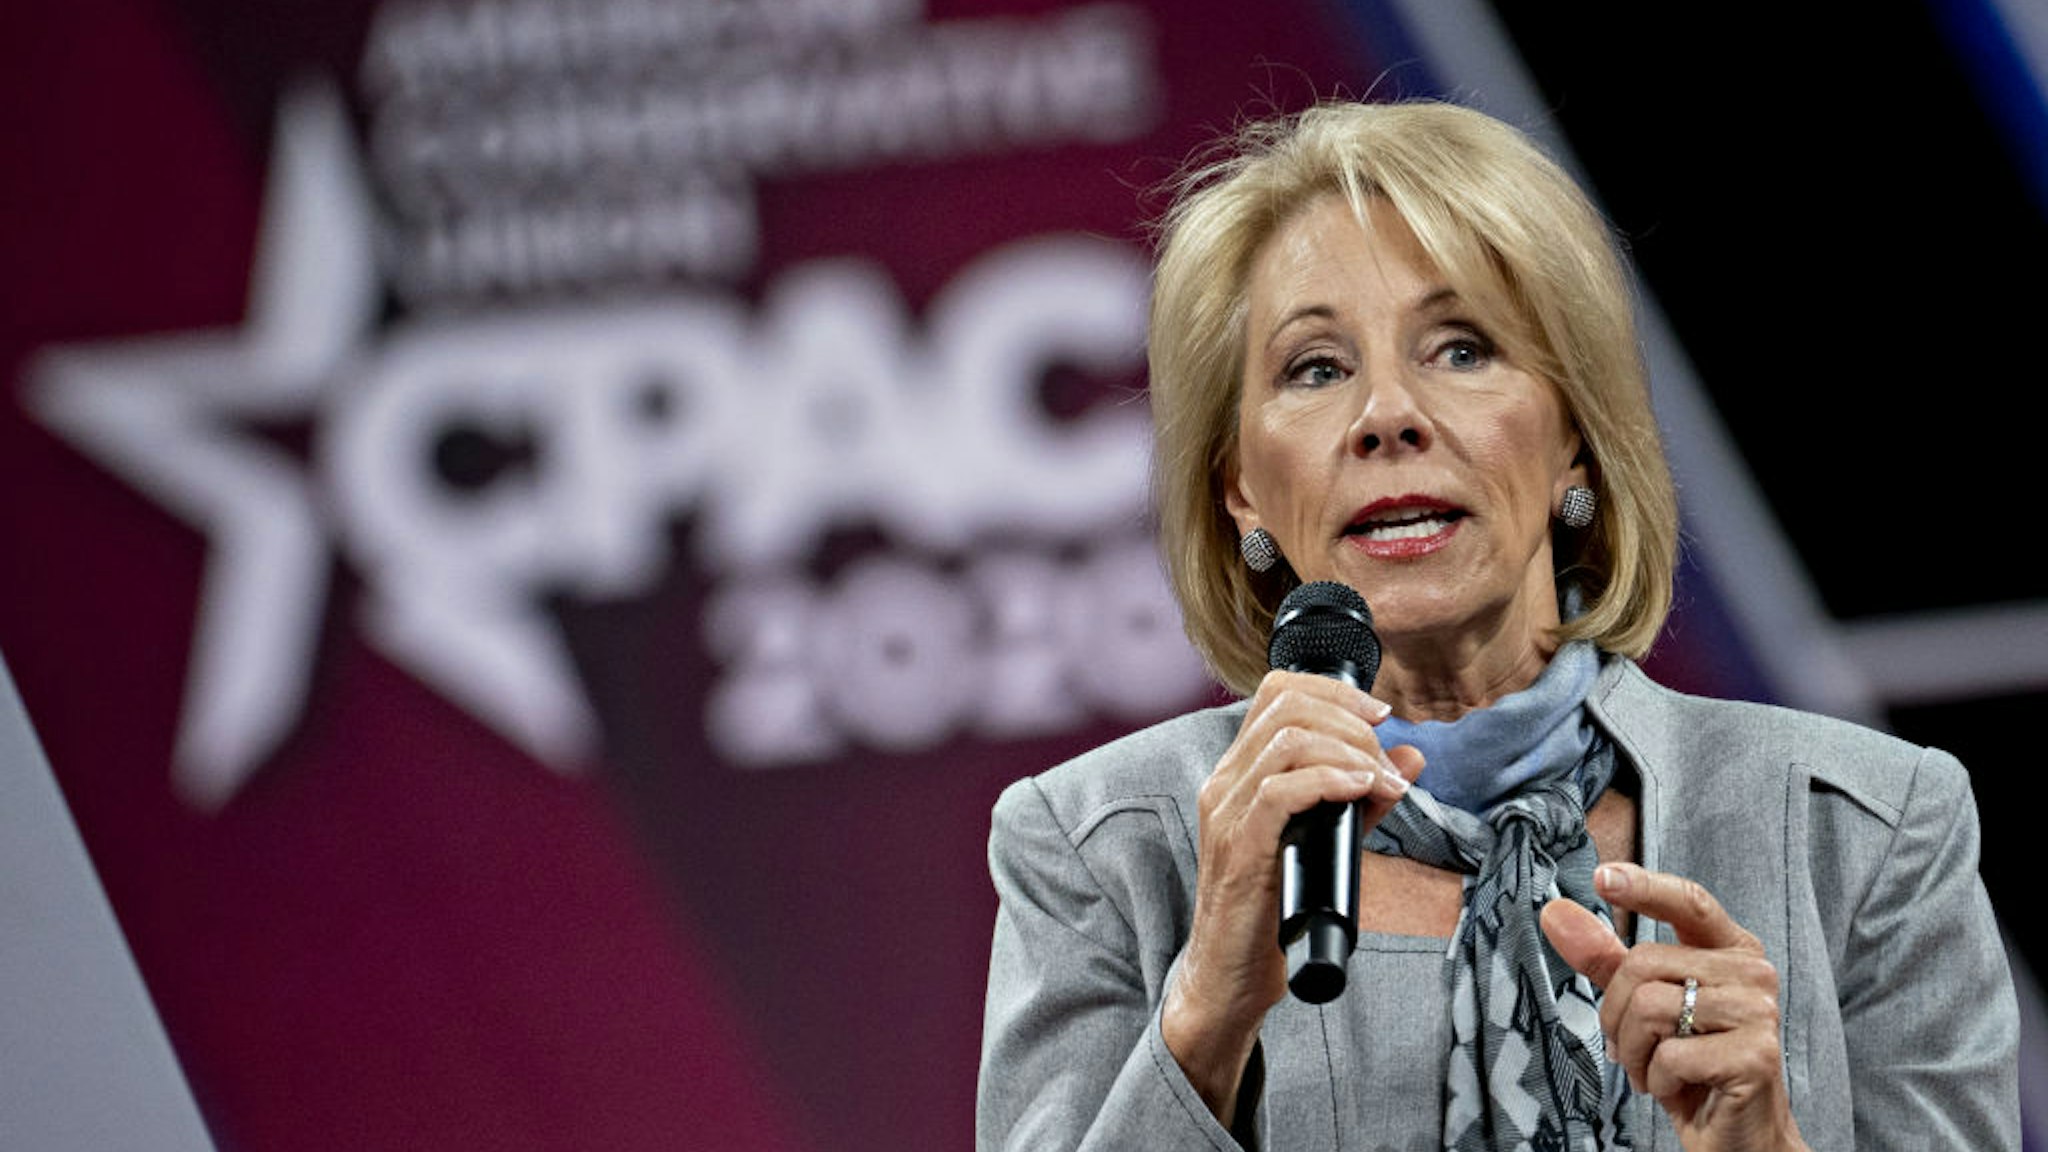 Betsy DeVos, U.S. secretary of education, speaks during a discussion at the Conservative Political Action Conference (CPAC) in National Harbor, Maryland, U.S., on Thursday, Feb. 27, 2020.